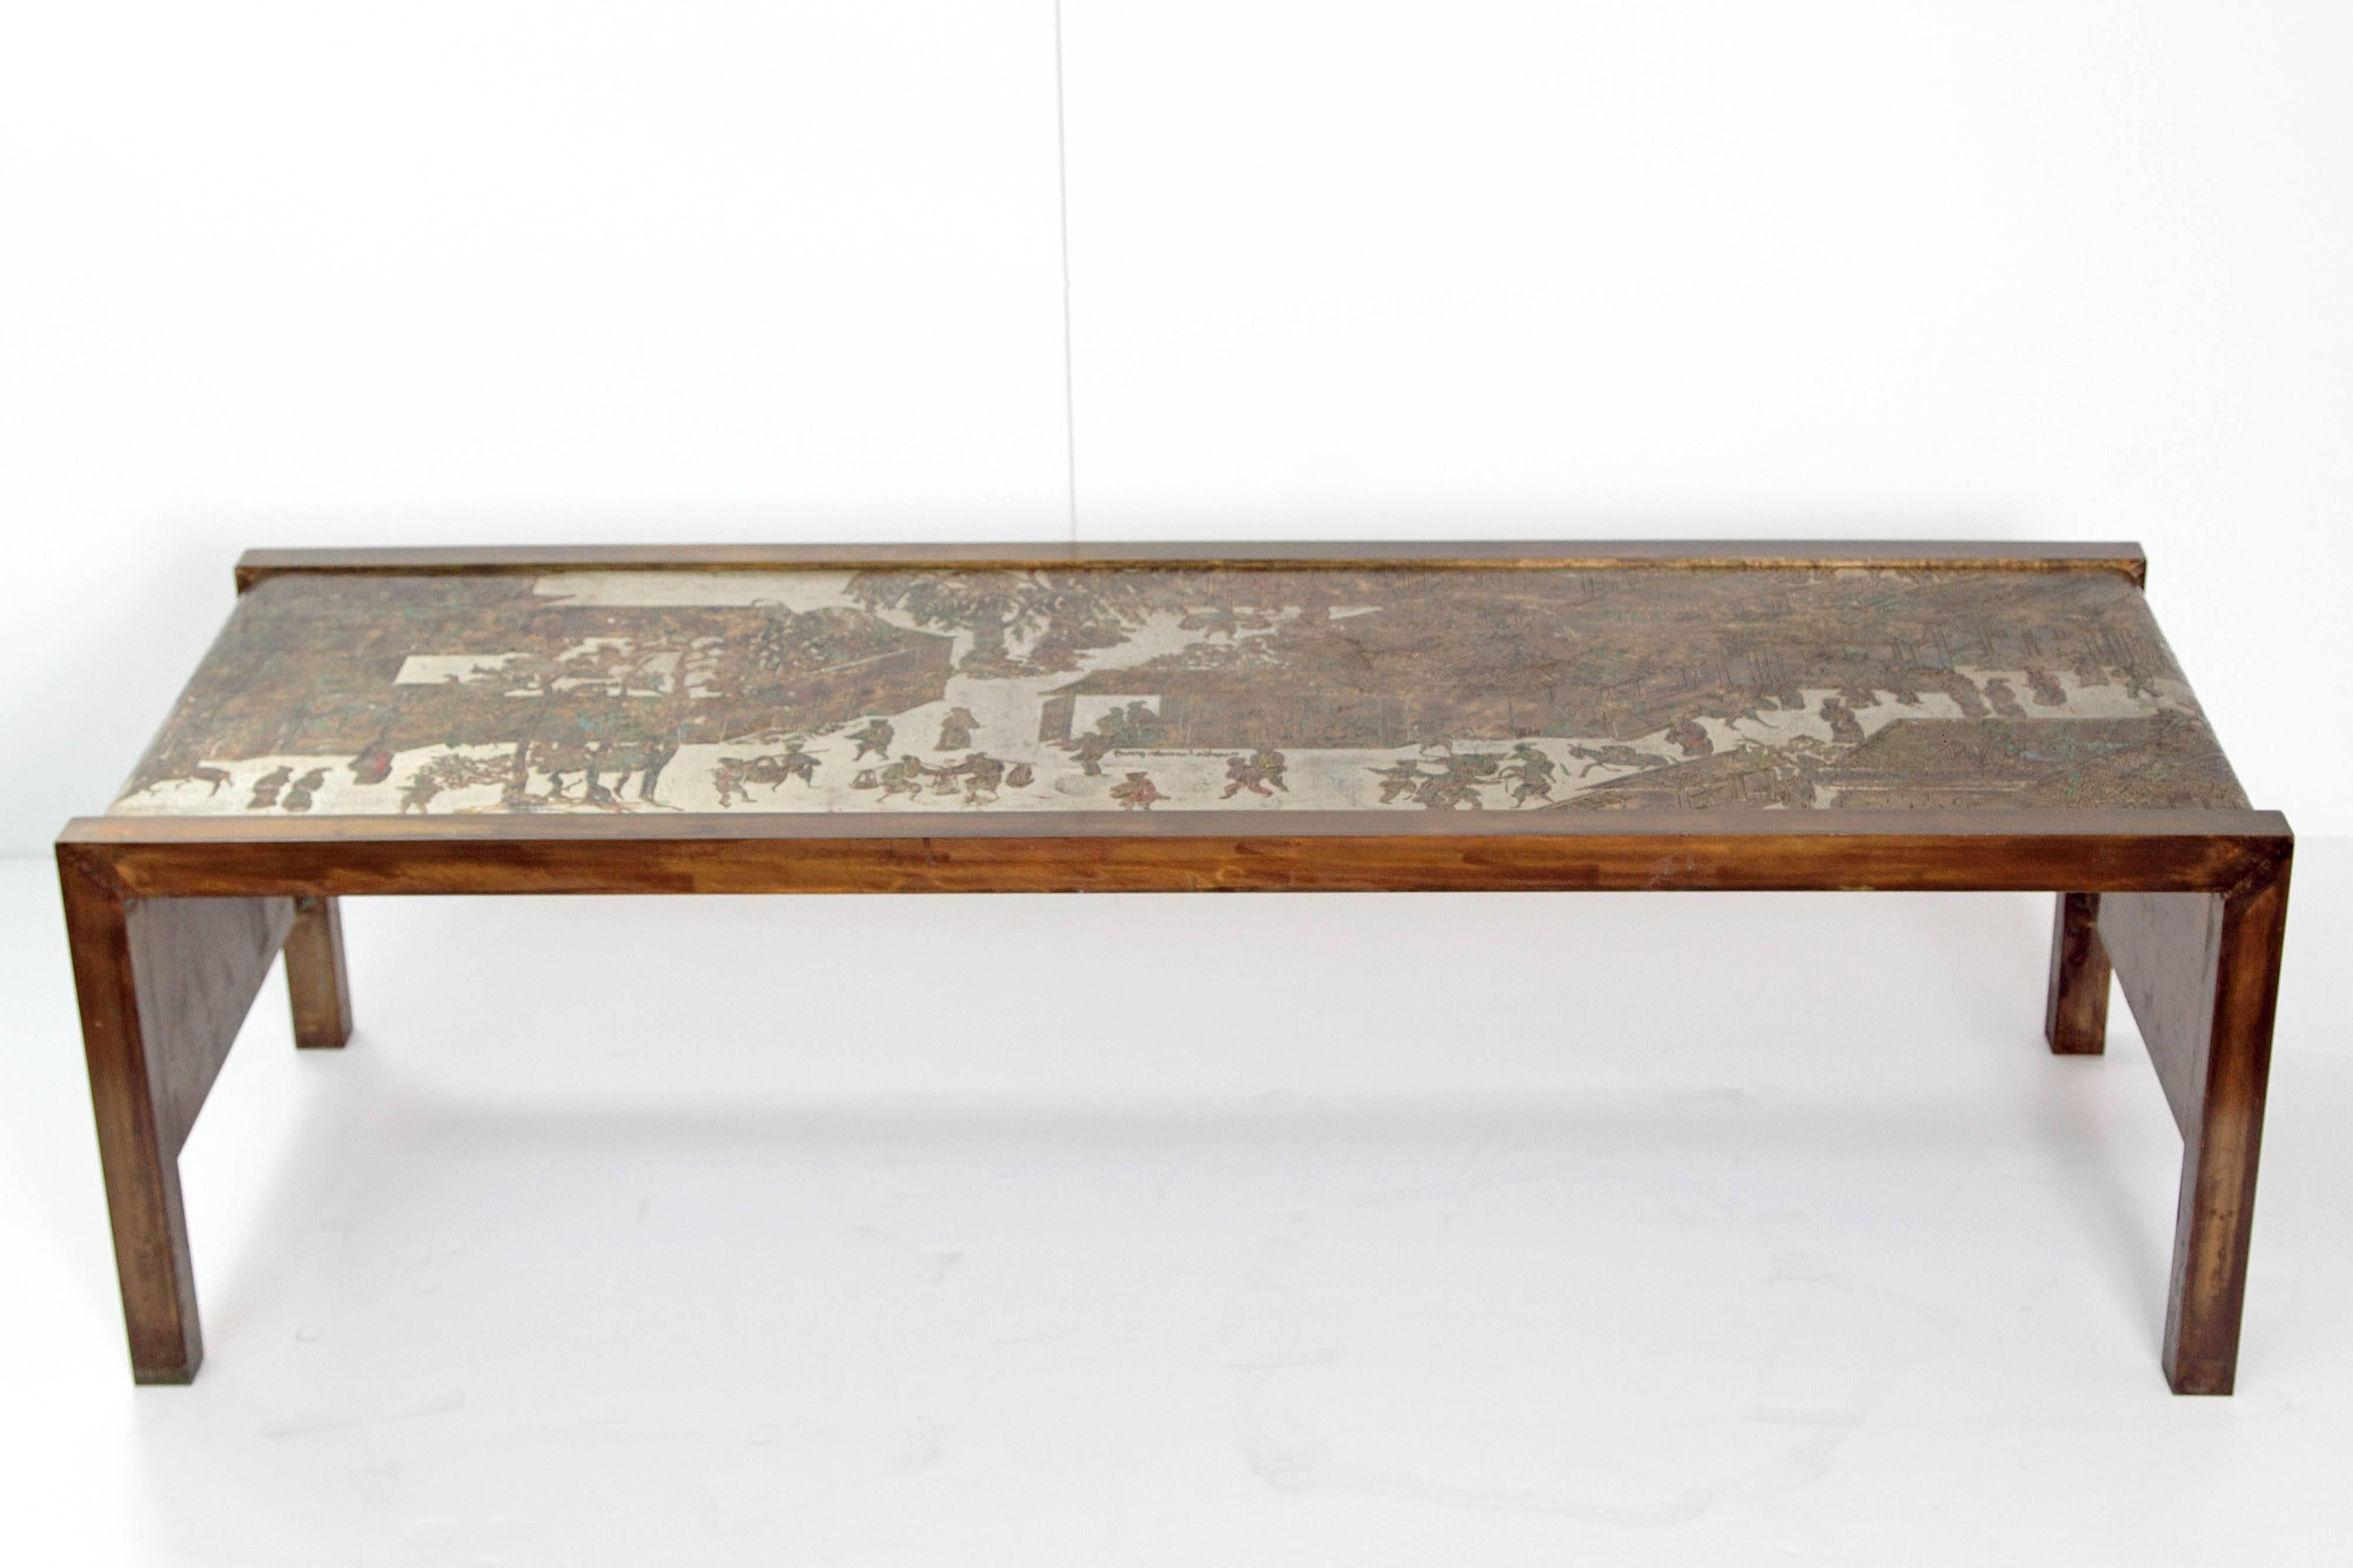 A rectangular form waterfall cocktail or coffee table, mixed metals, acid-etched and patinated bronze / brass, Chinese Village scene extends down the sides of the table on both ends, Chan Series, signed twice on the top, great color.